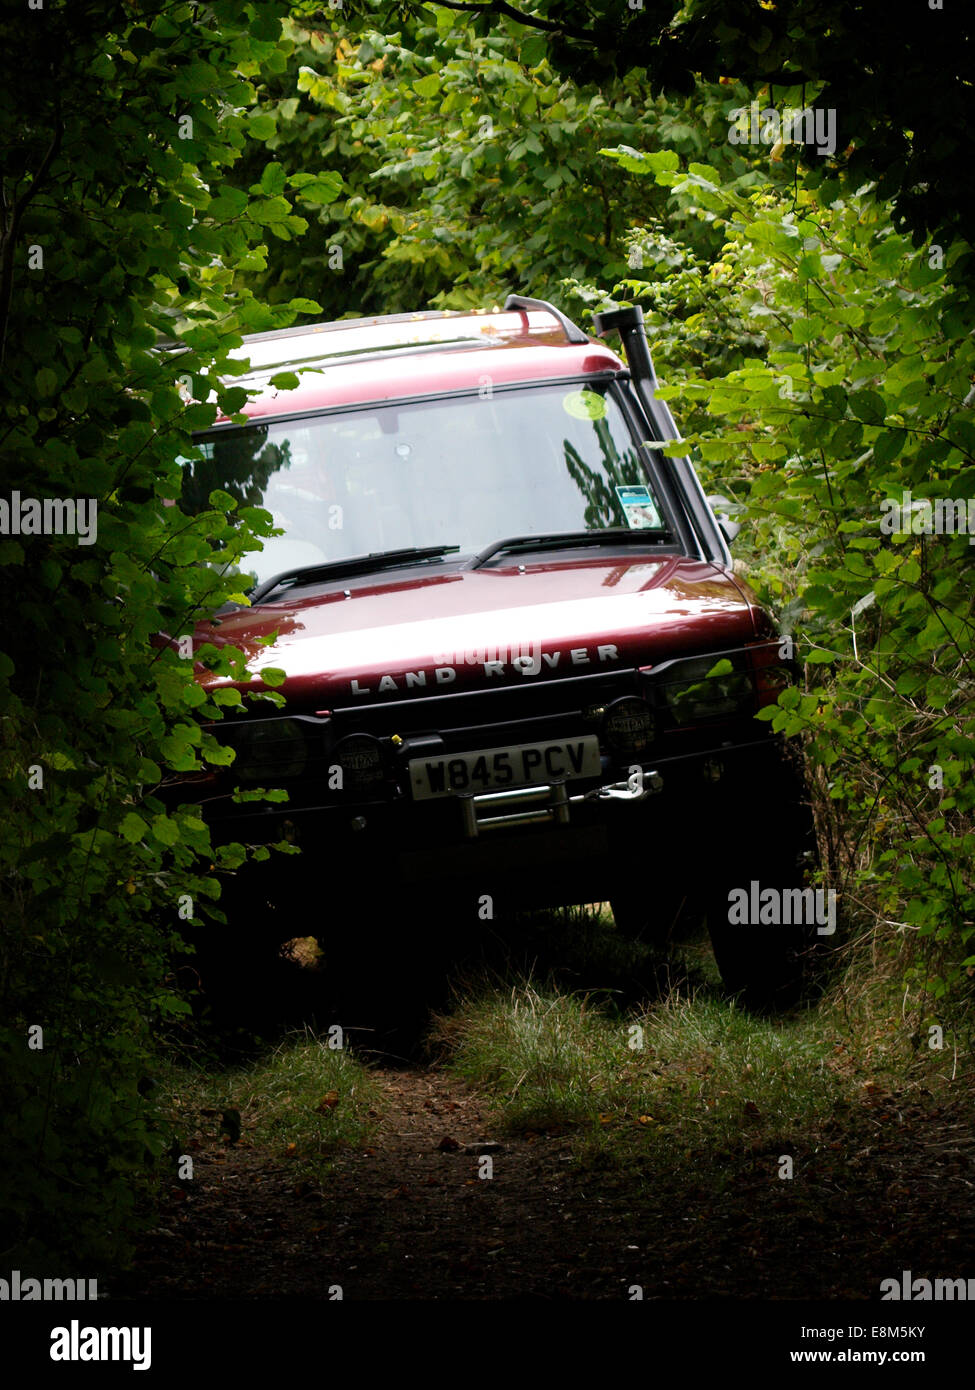 Land-Rover green laning on a bridleway, Chettle, Dorset, UK Stock Photo